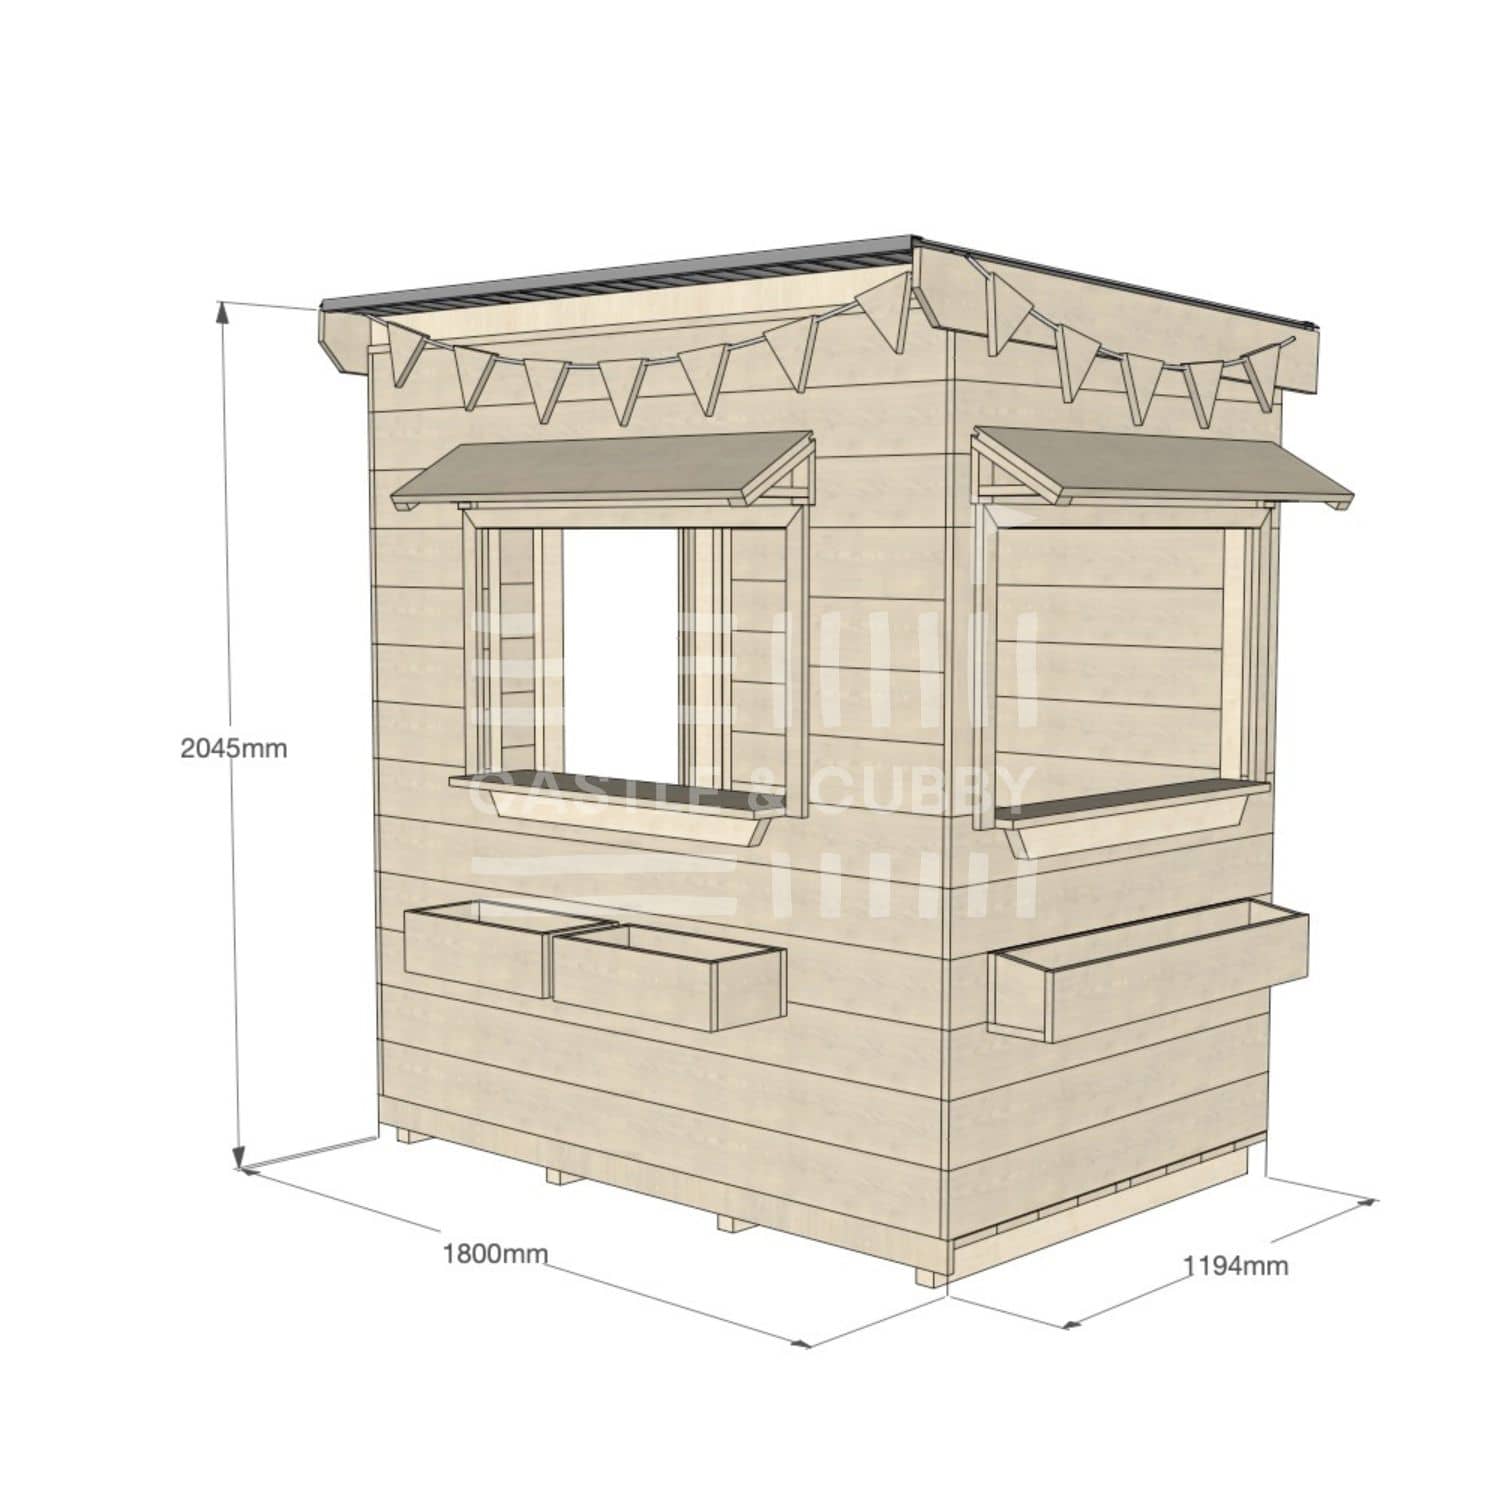 Flat roof raw extra height wooden cubby house commercial education little rectangle dimensions